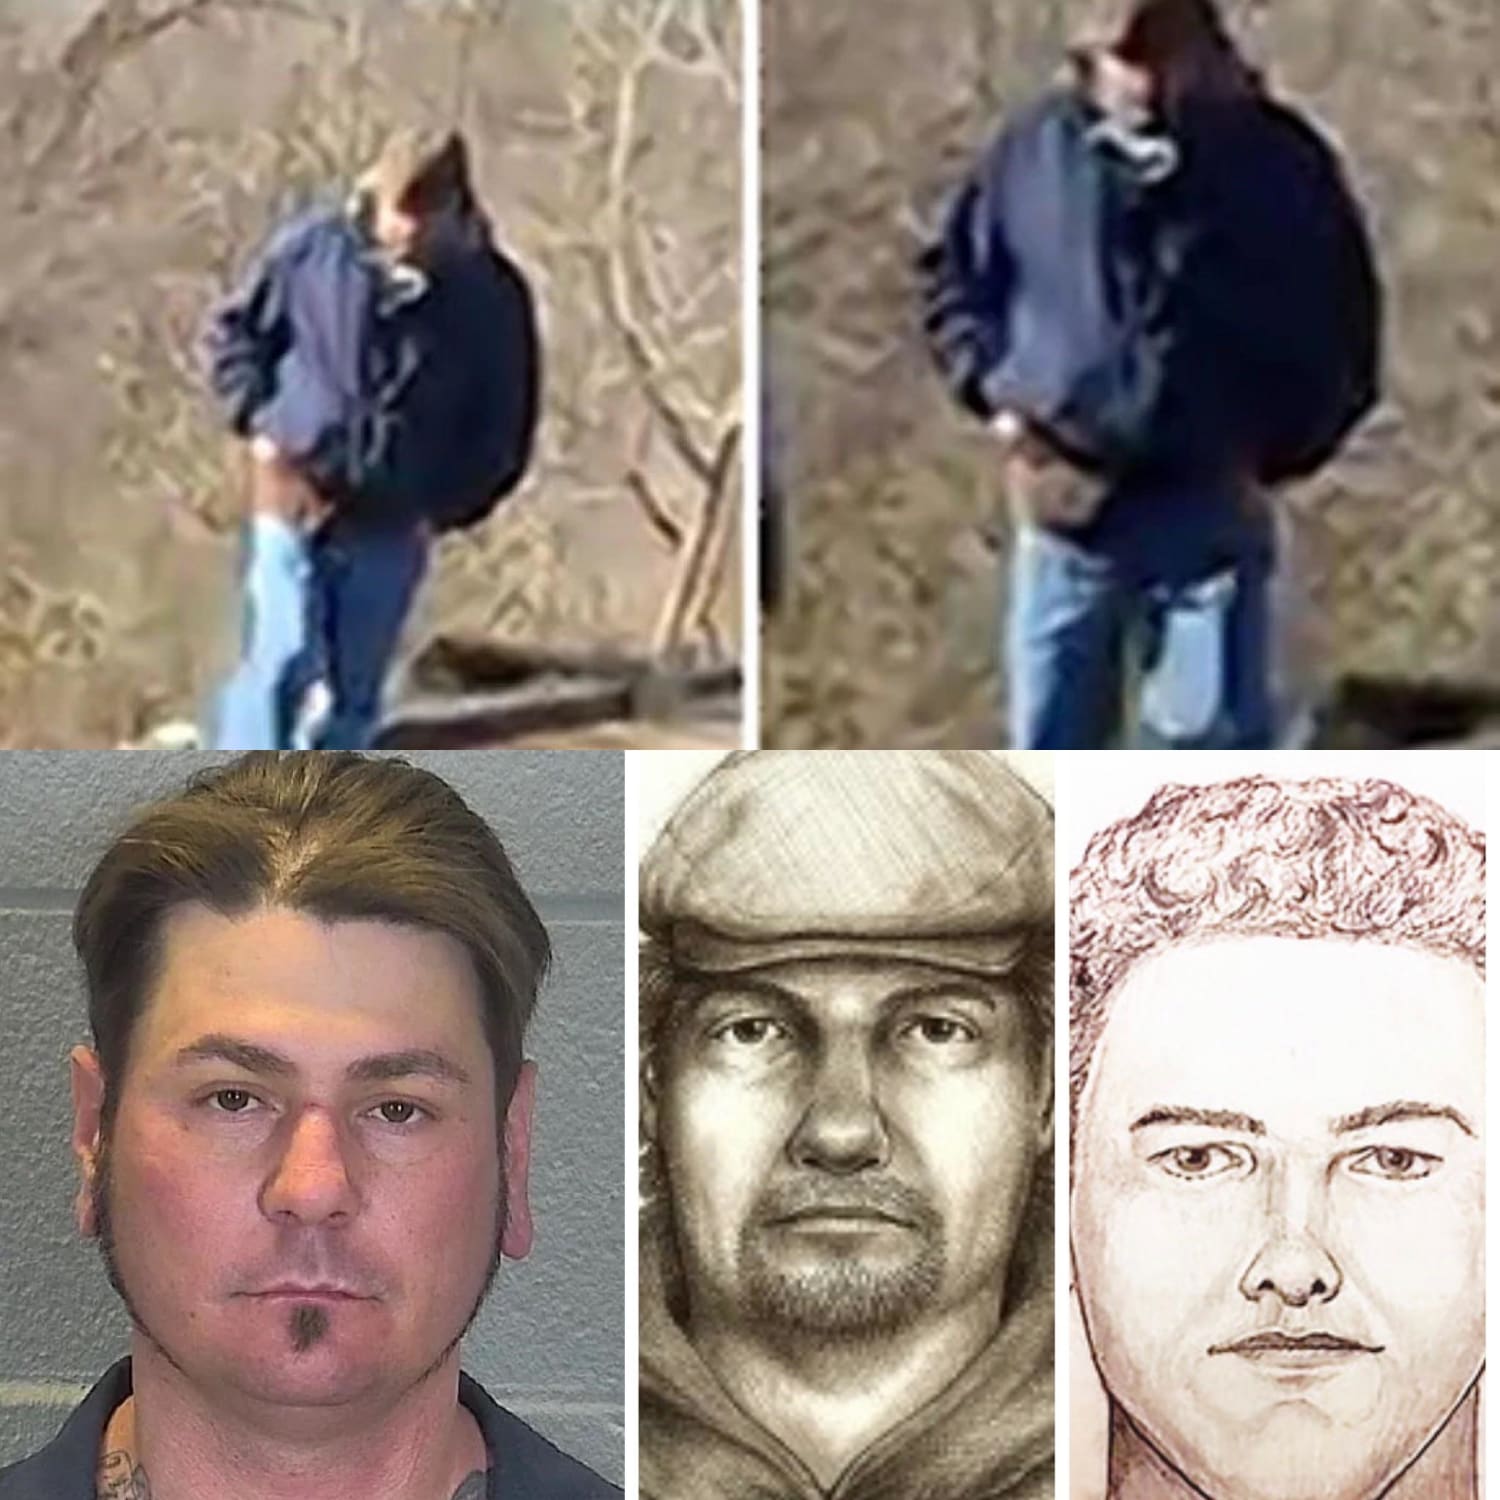 Detectives have named James Brian Chadwell II as a new person of interest in The Delphi murders. Could this be the guy?